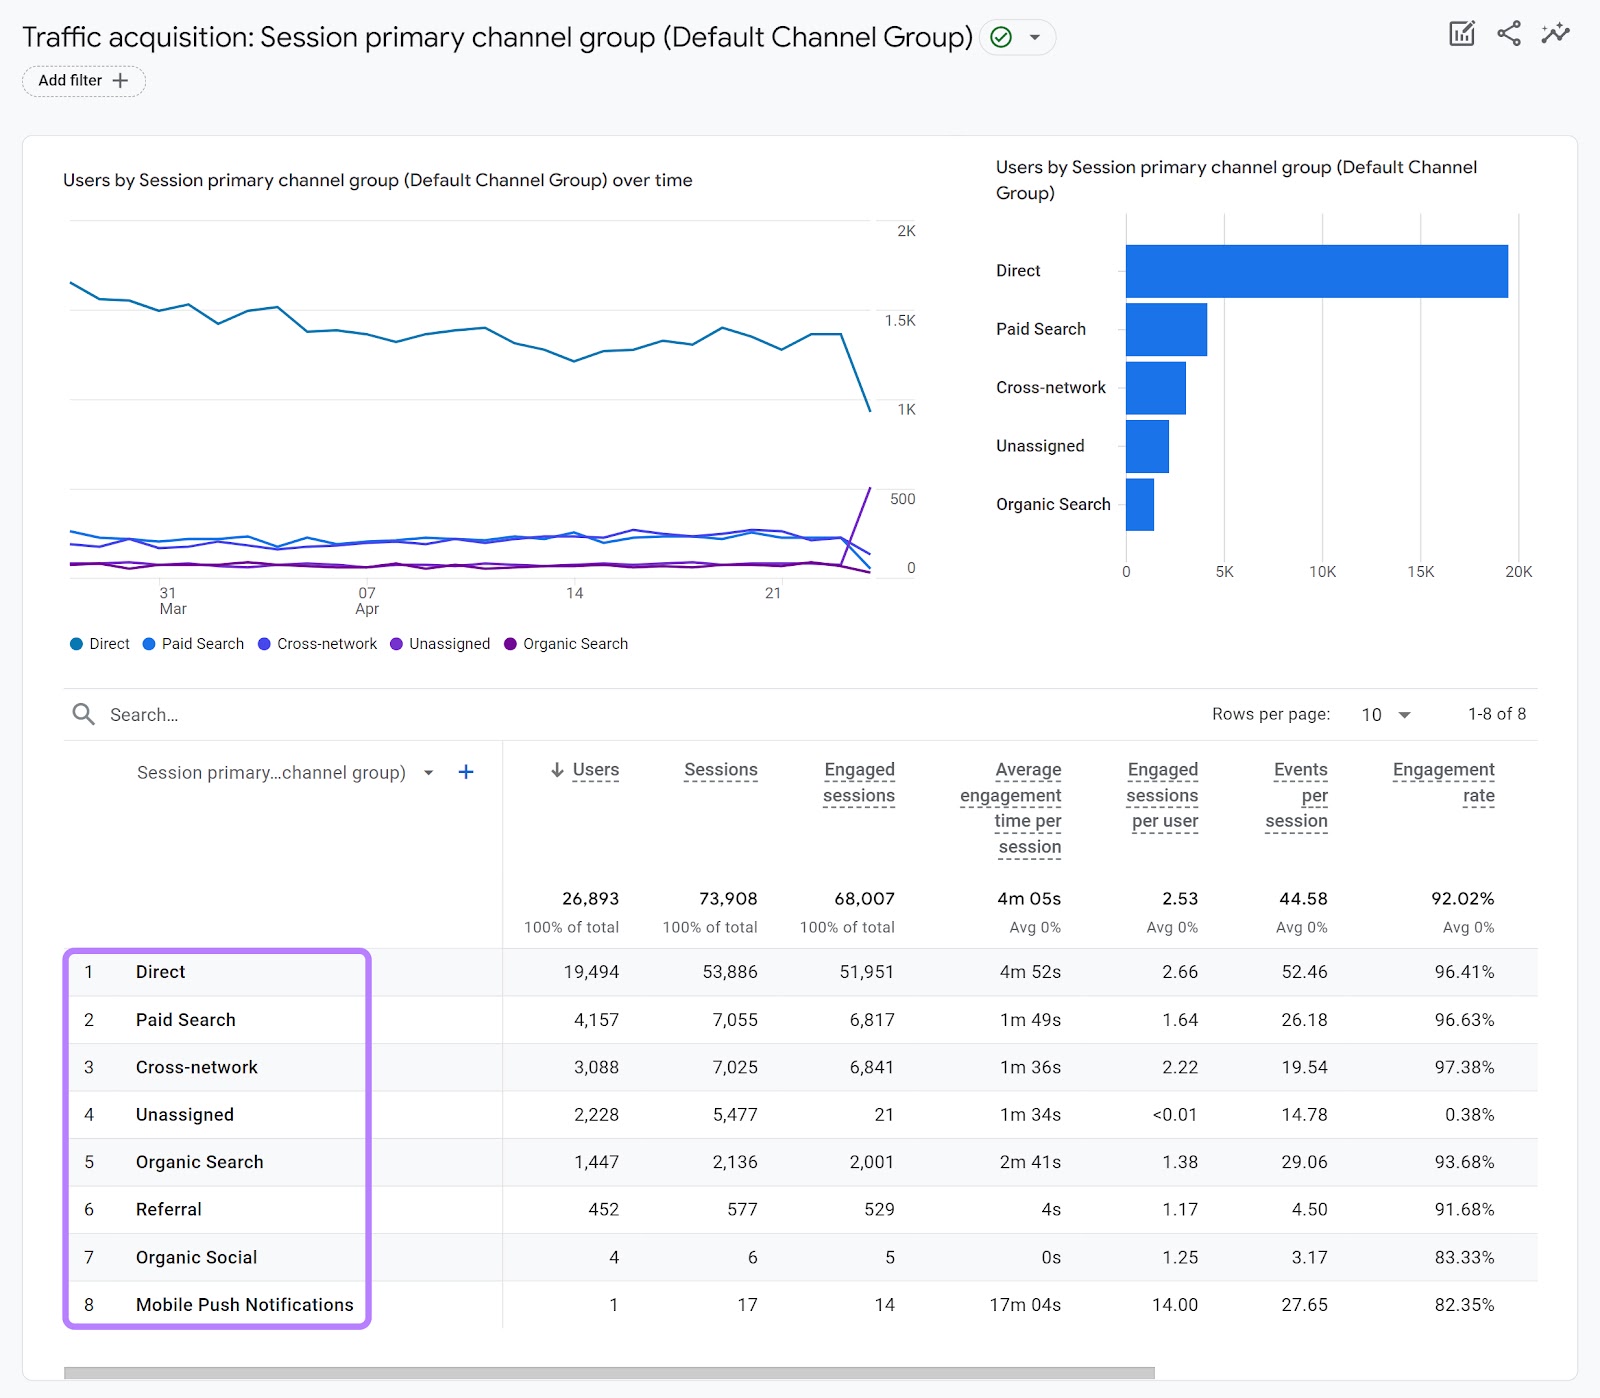 Google Analytics Traffic Acquisition report with the traffic sources highlighted.